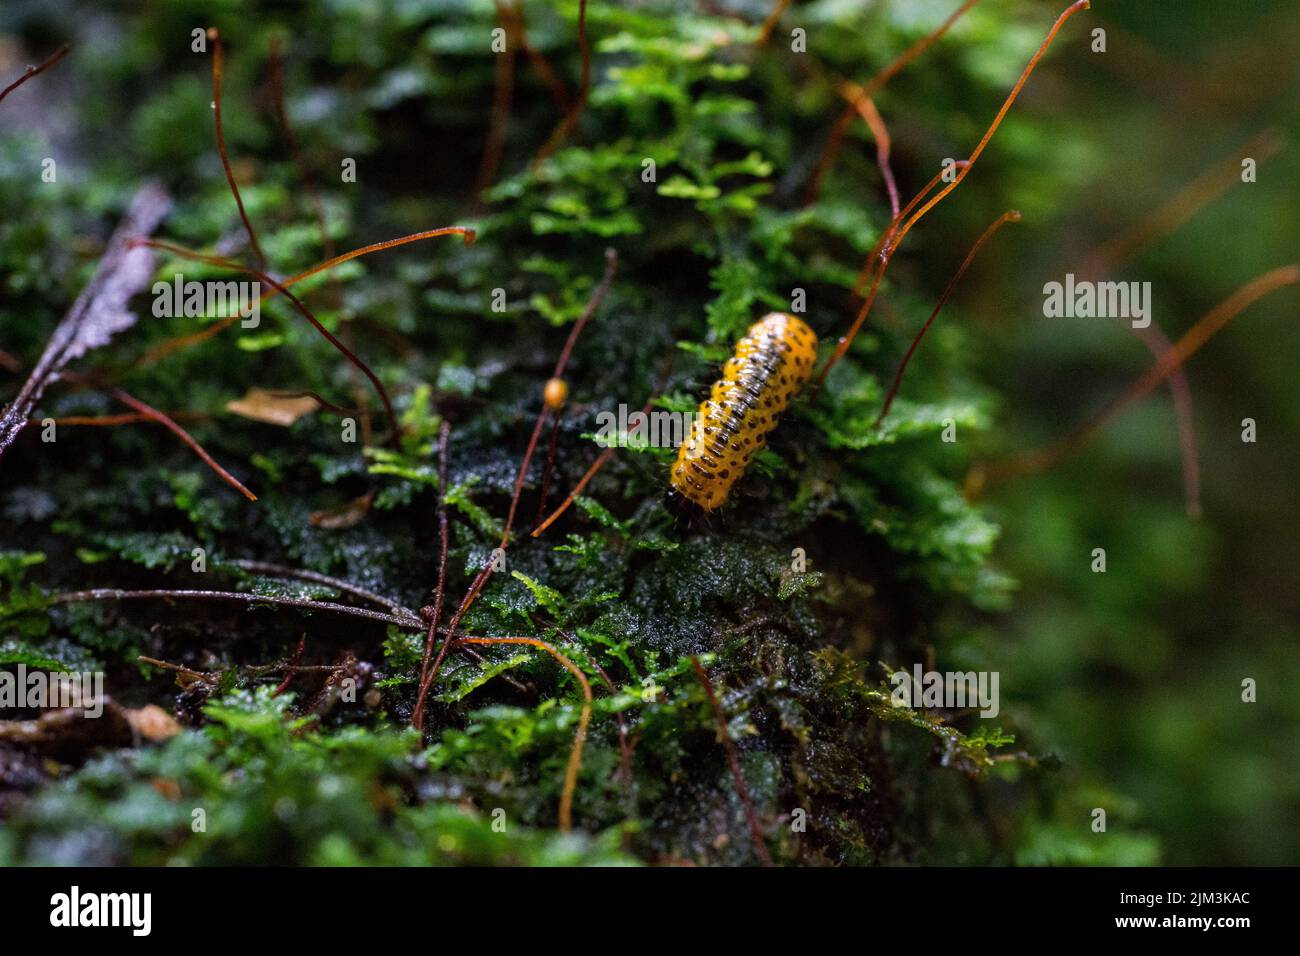 A closeup of a Ladybug larva on a mossed cover tree trunk Stock Photo